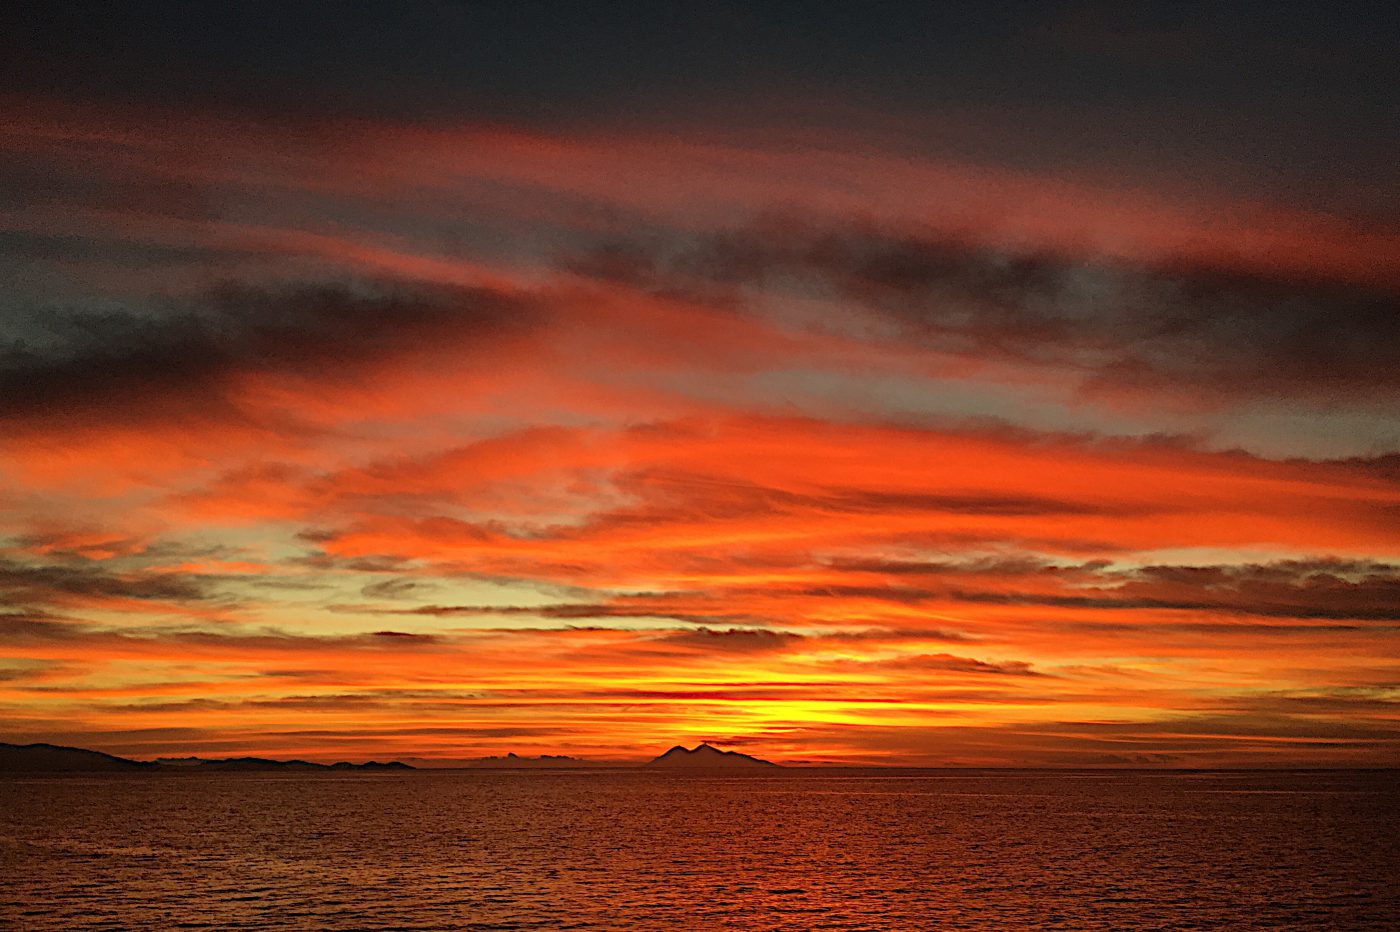 Unfiltered, dramatic Sunset in Komodo. It's like this every single day!